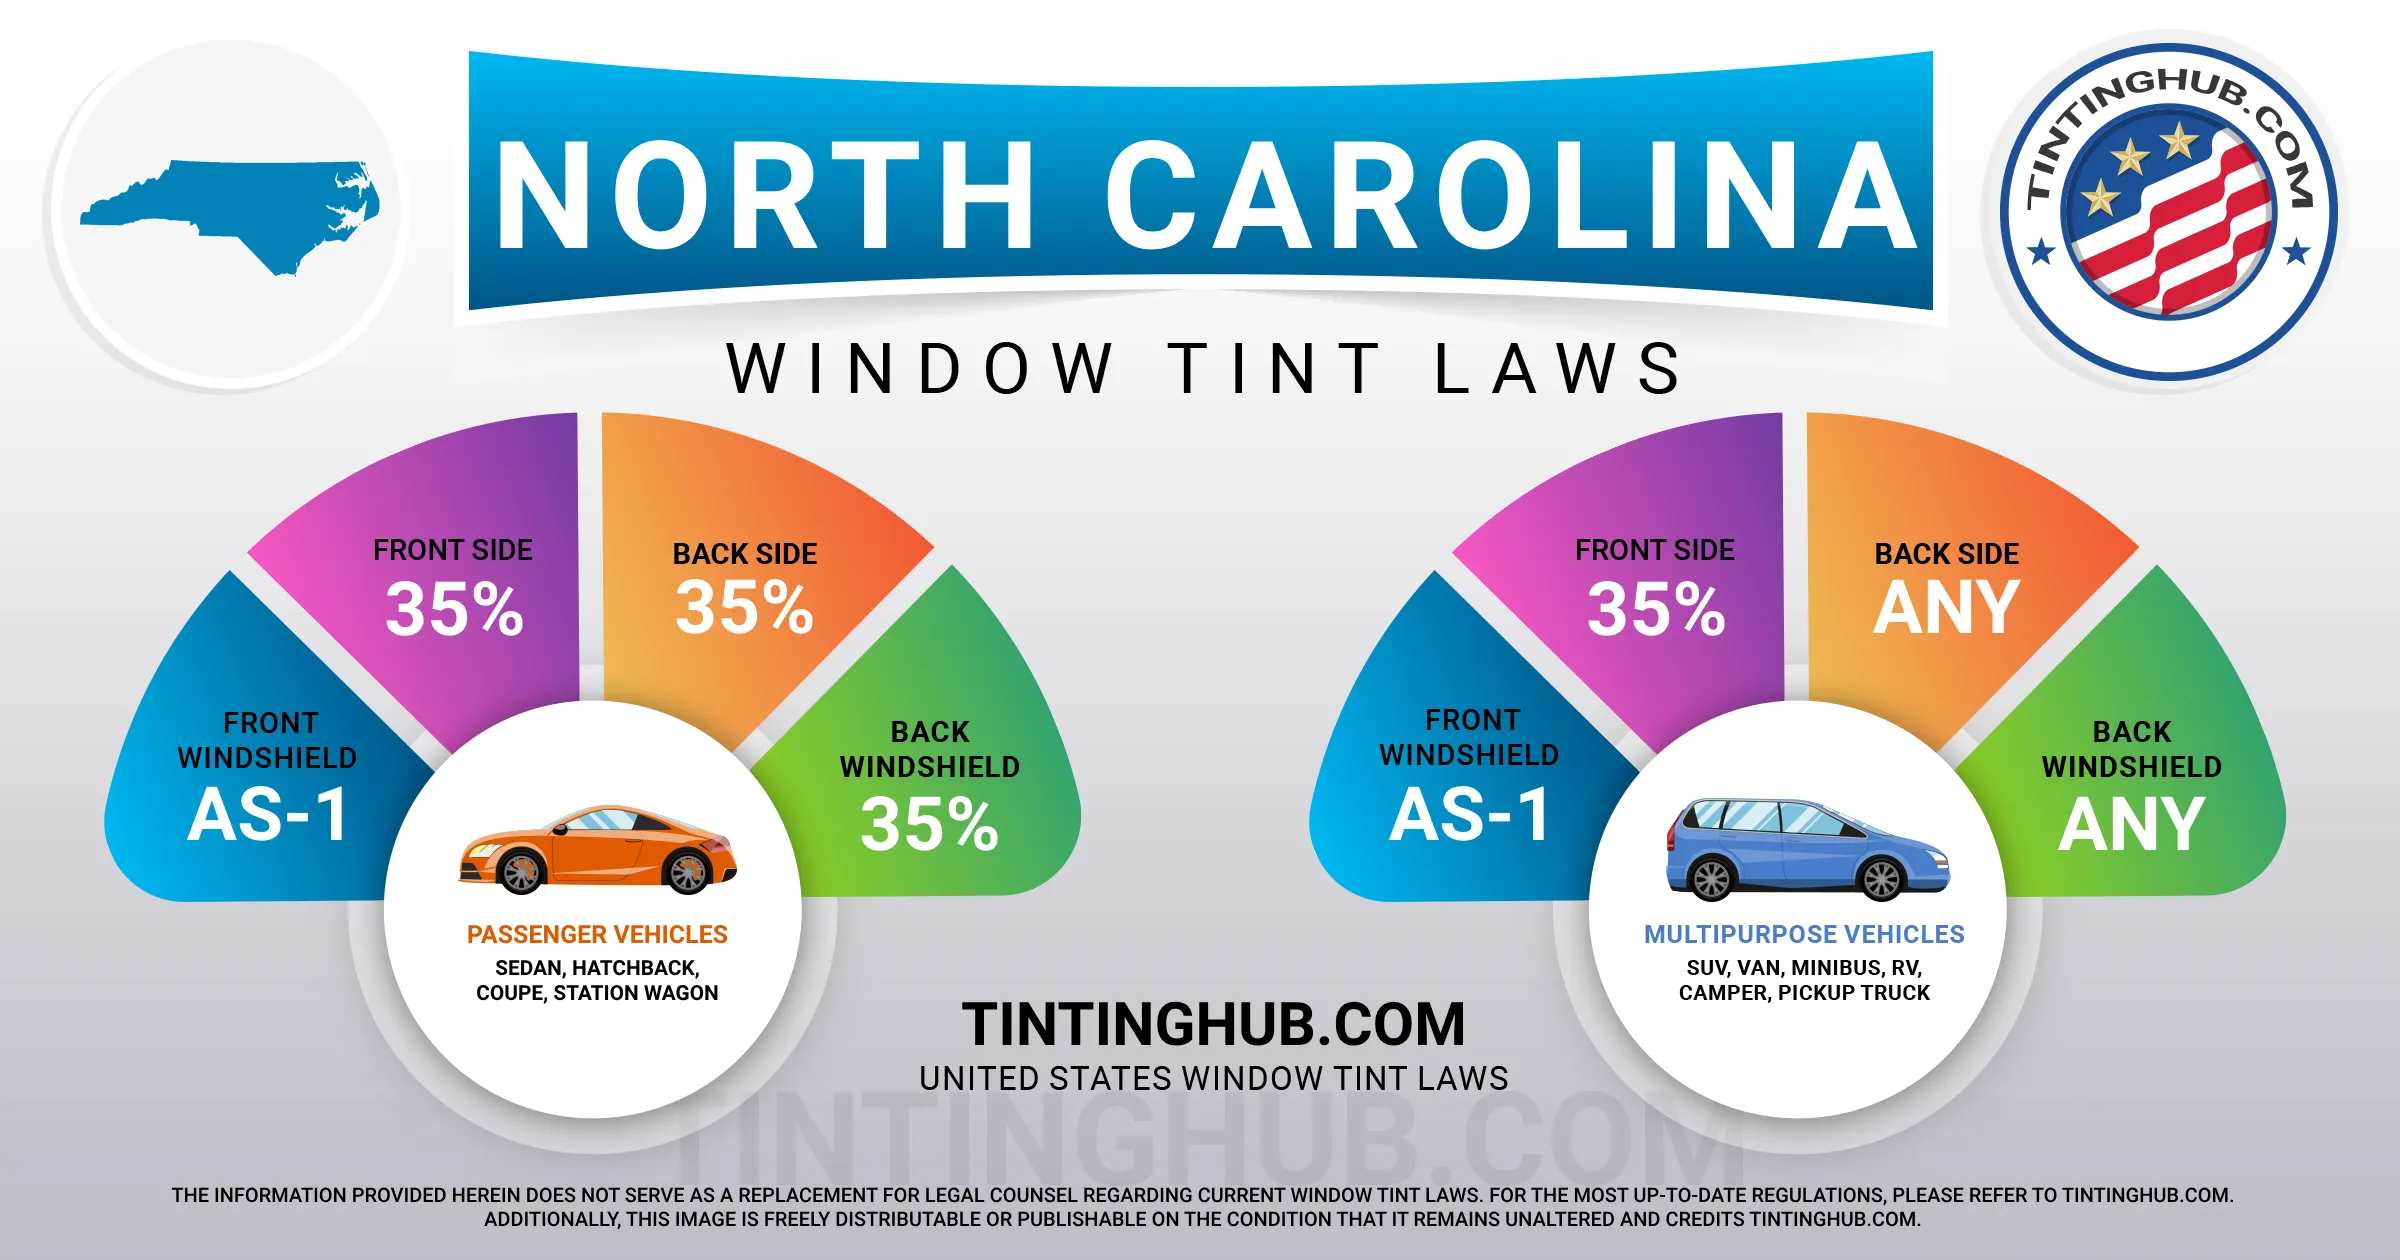 North Carolina has limits on window tints for your car, VERIFY